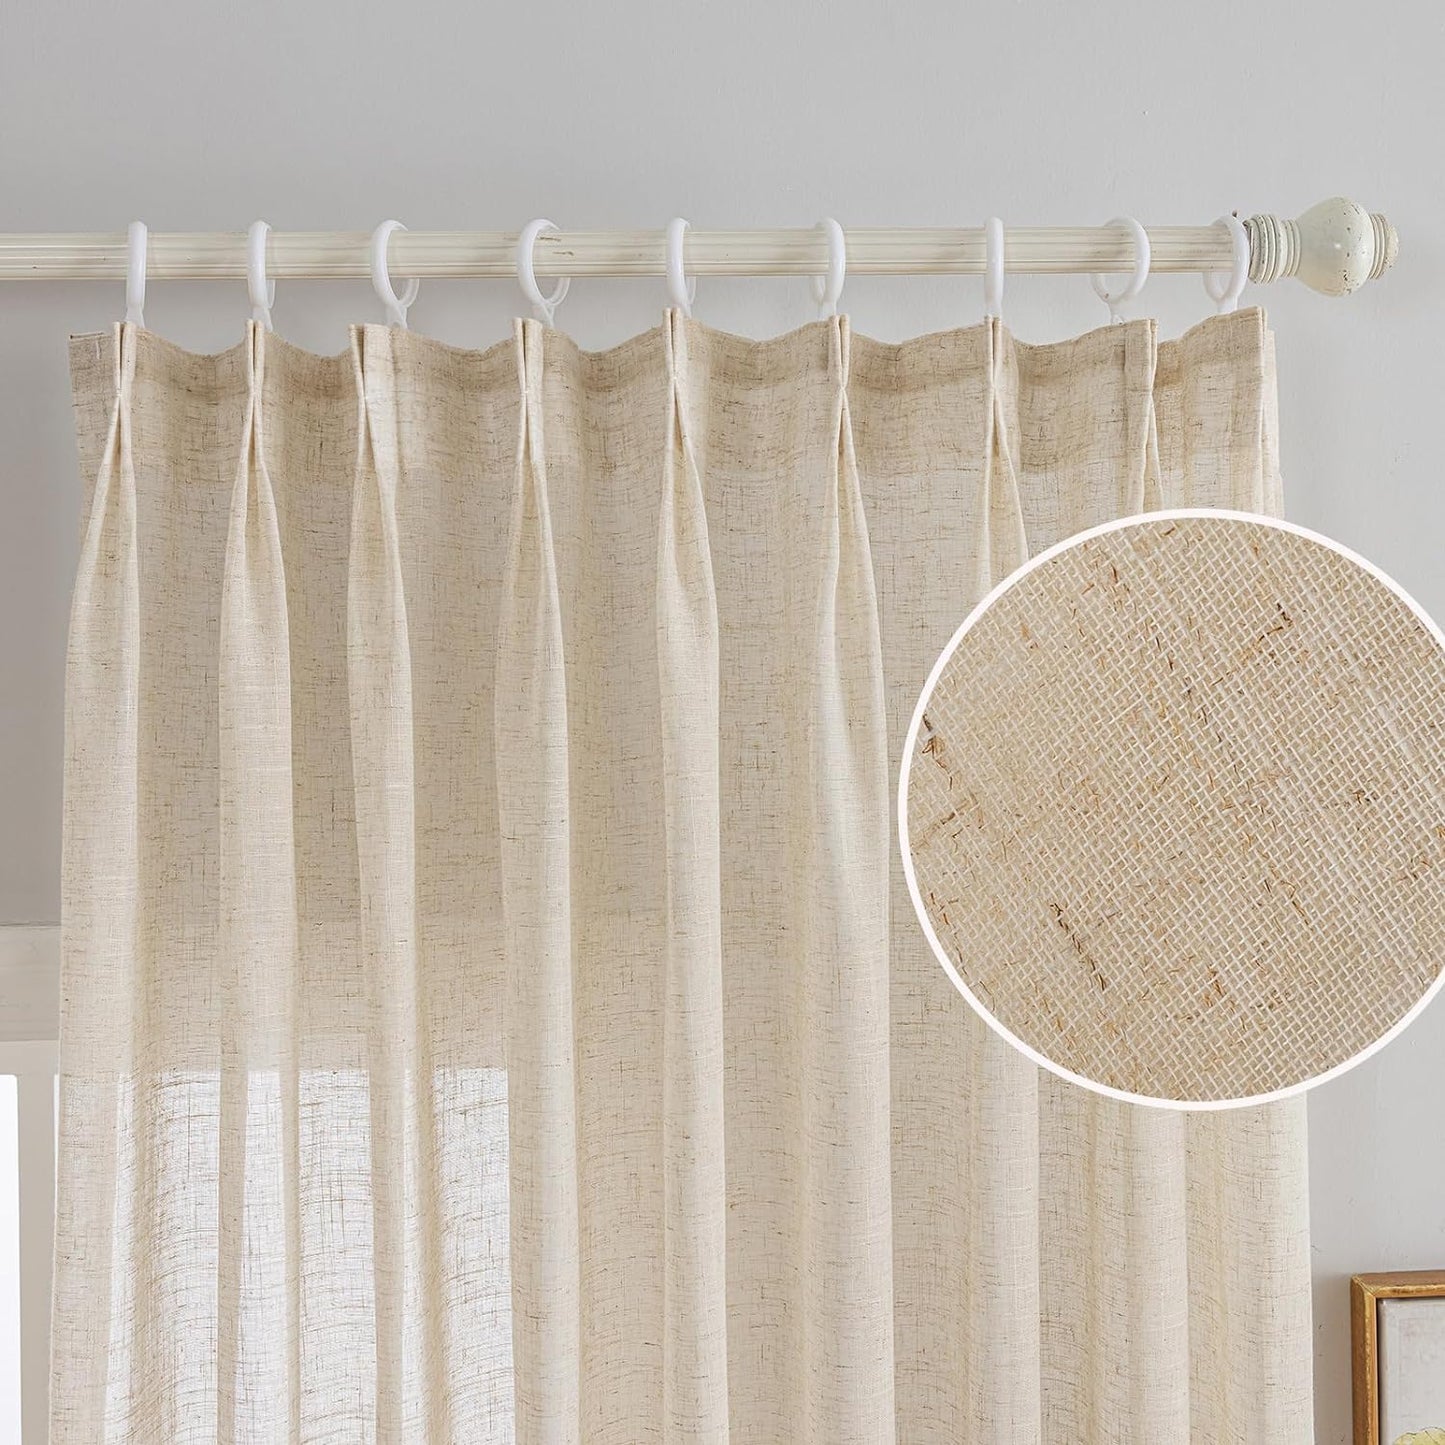 LUGOTAL Pinch Pleated Drapes 108 Inches Long 1 Panel off White Chiffon Sheer Curtains for Living Room and Bedroom Semi-Sheer Light Filtering Curtains & Drapes for Sliding Glass Door, W52 X L108  LUGOTAL Natural (W52" X L96")*1 Panel 